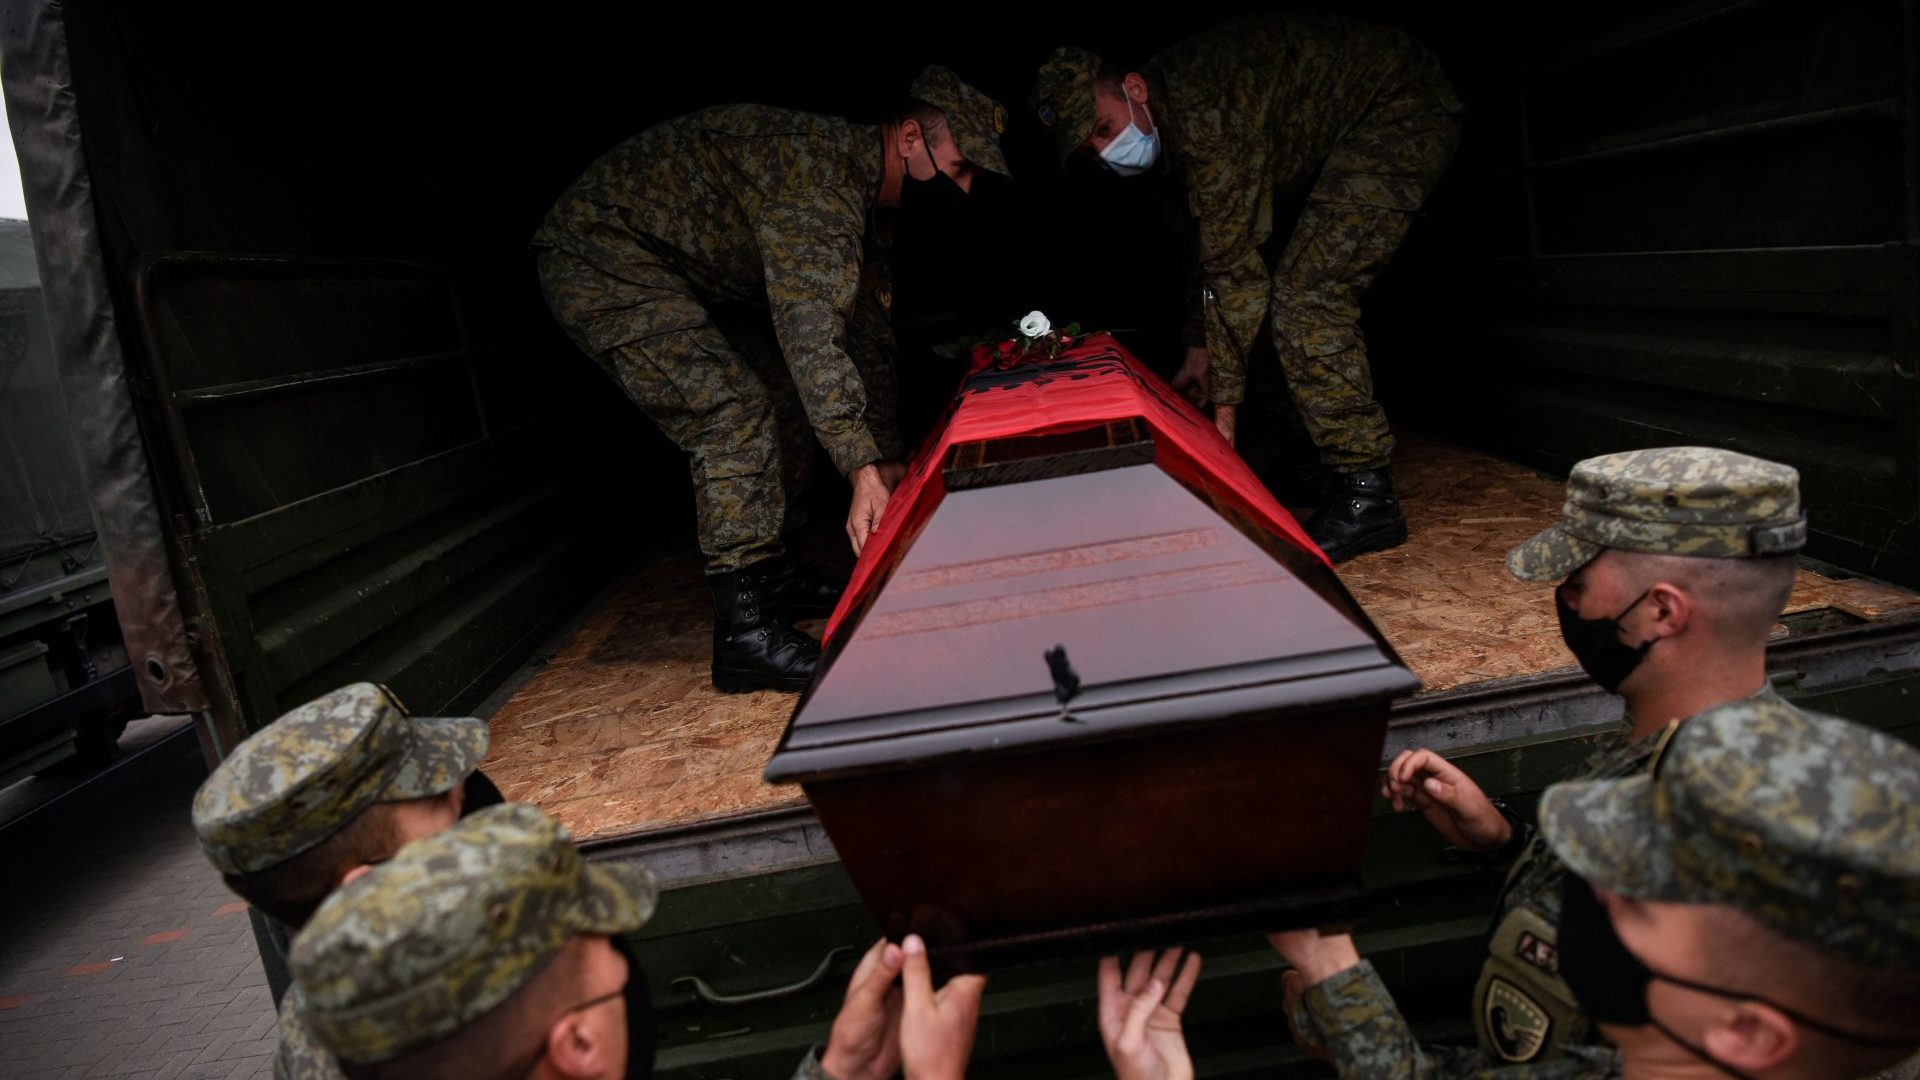 Kosovo soldiers carry coffins bearing the remains of Kosovo Albanians killed by Serbian security forces during the 1998-99 Kosovo War, on September 30, 2021. Photo: ARMEND NIMANI/AFP via Getty Images